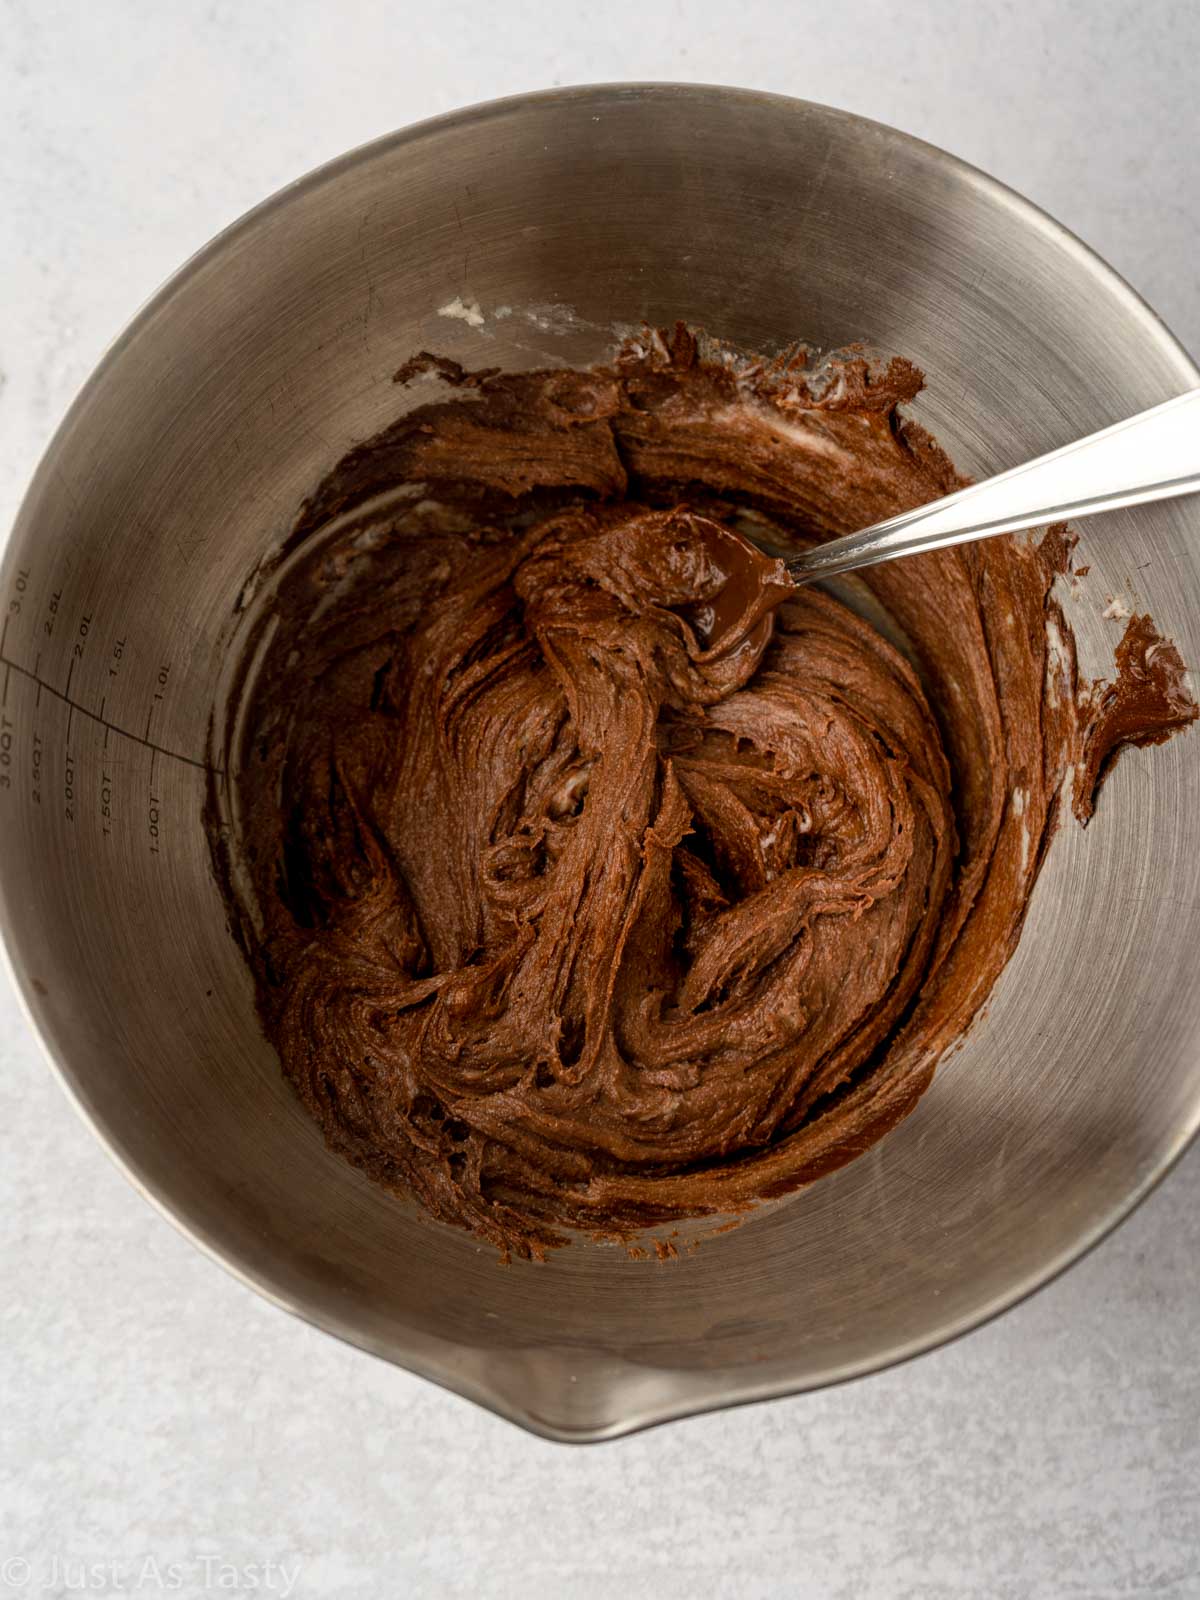 Chocolate cake batter in a bowl.